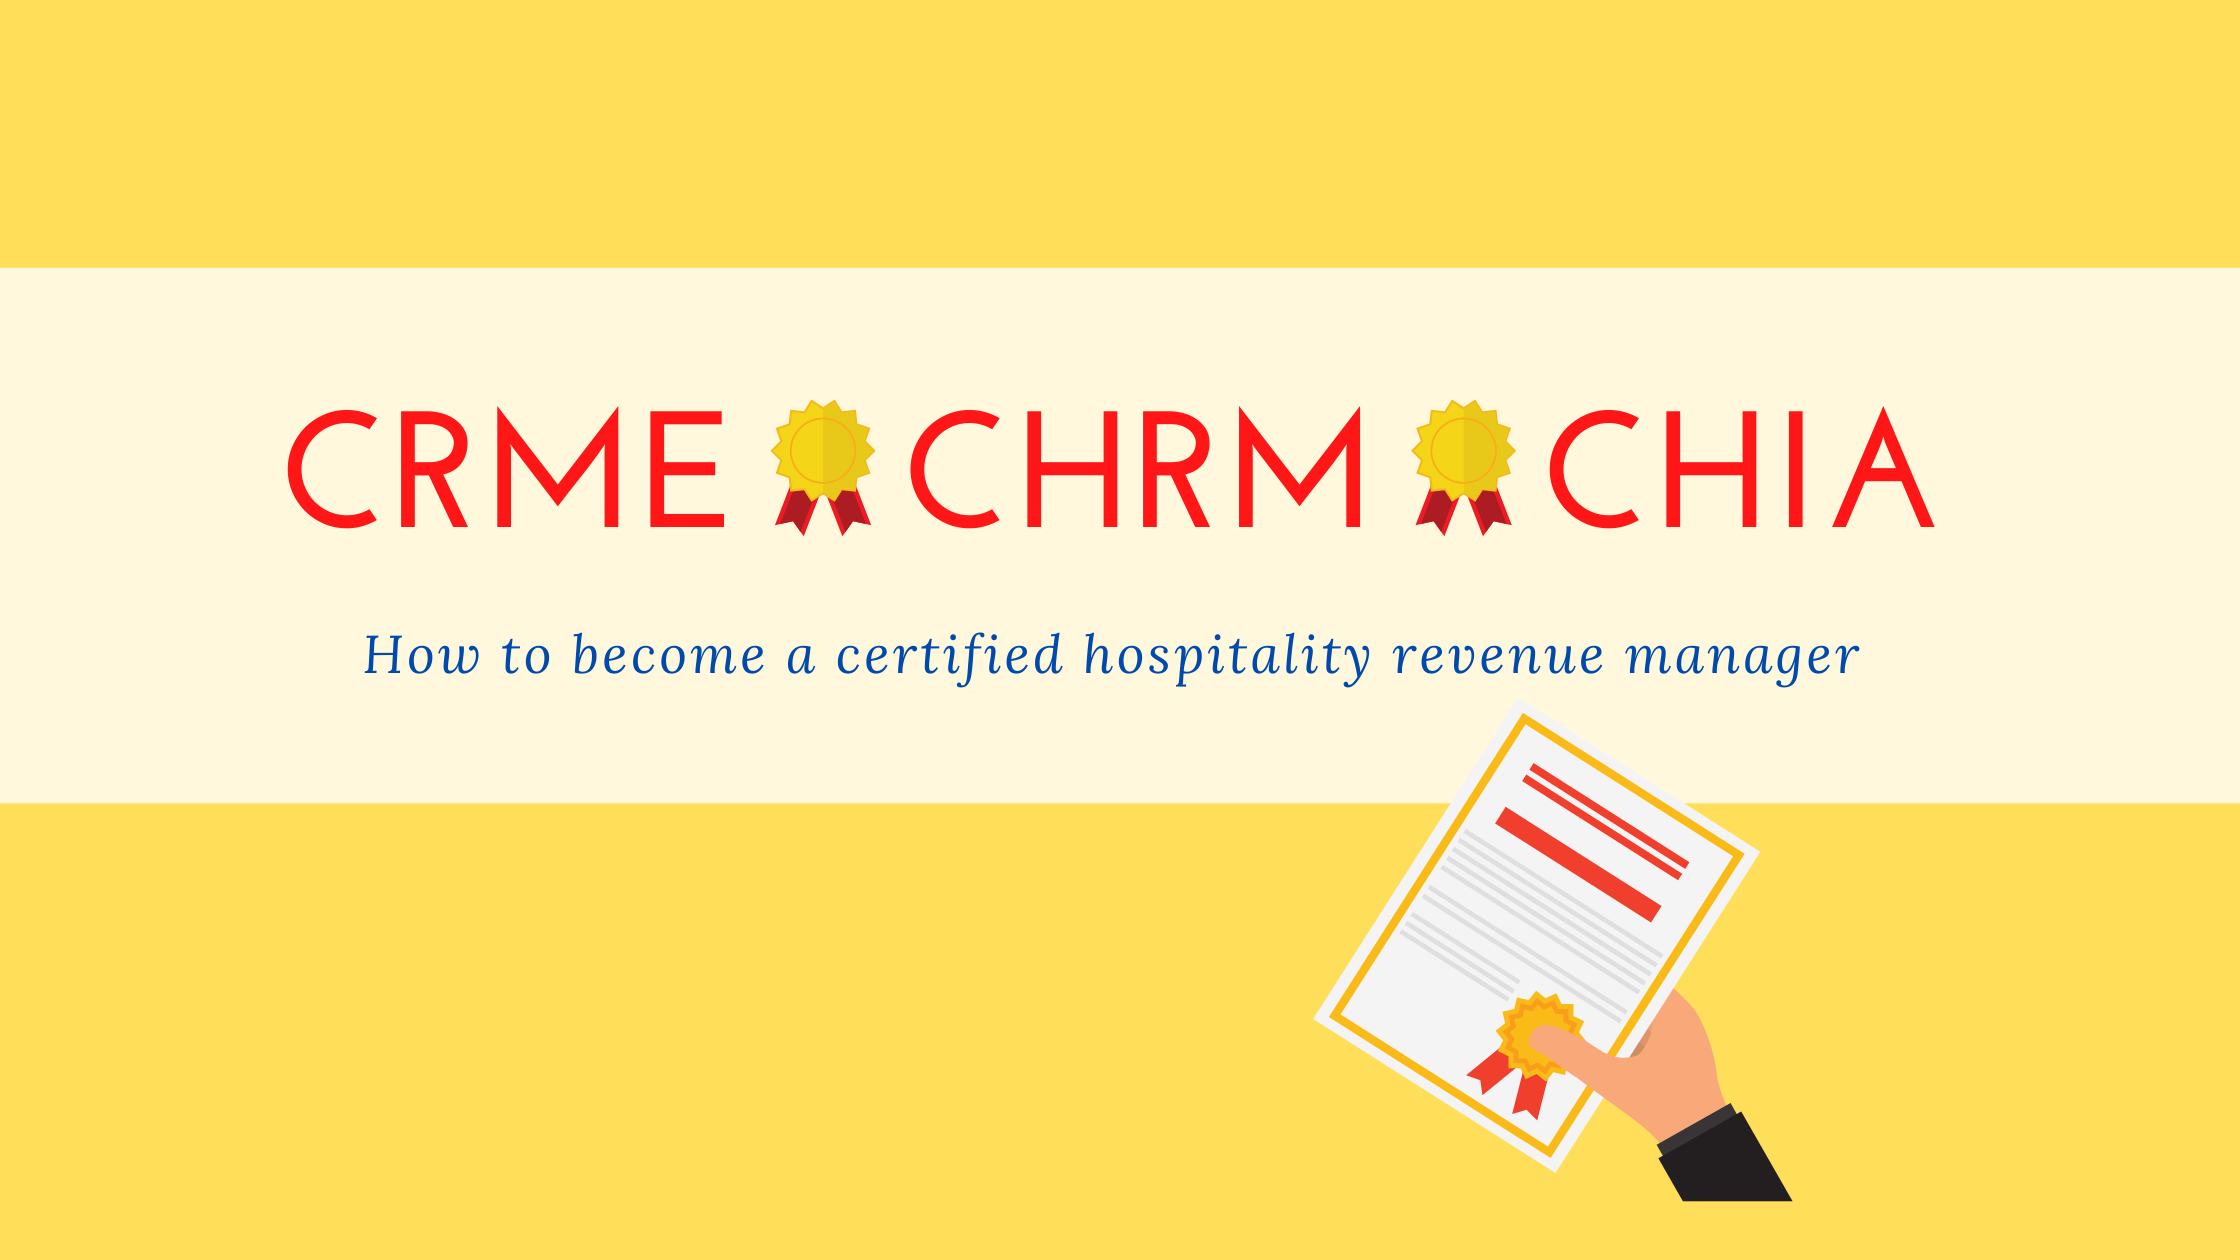 CRME, CHRM, CHIA: How to become a certified hospitality revenue manager